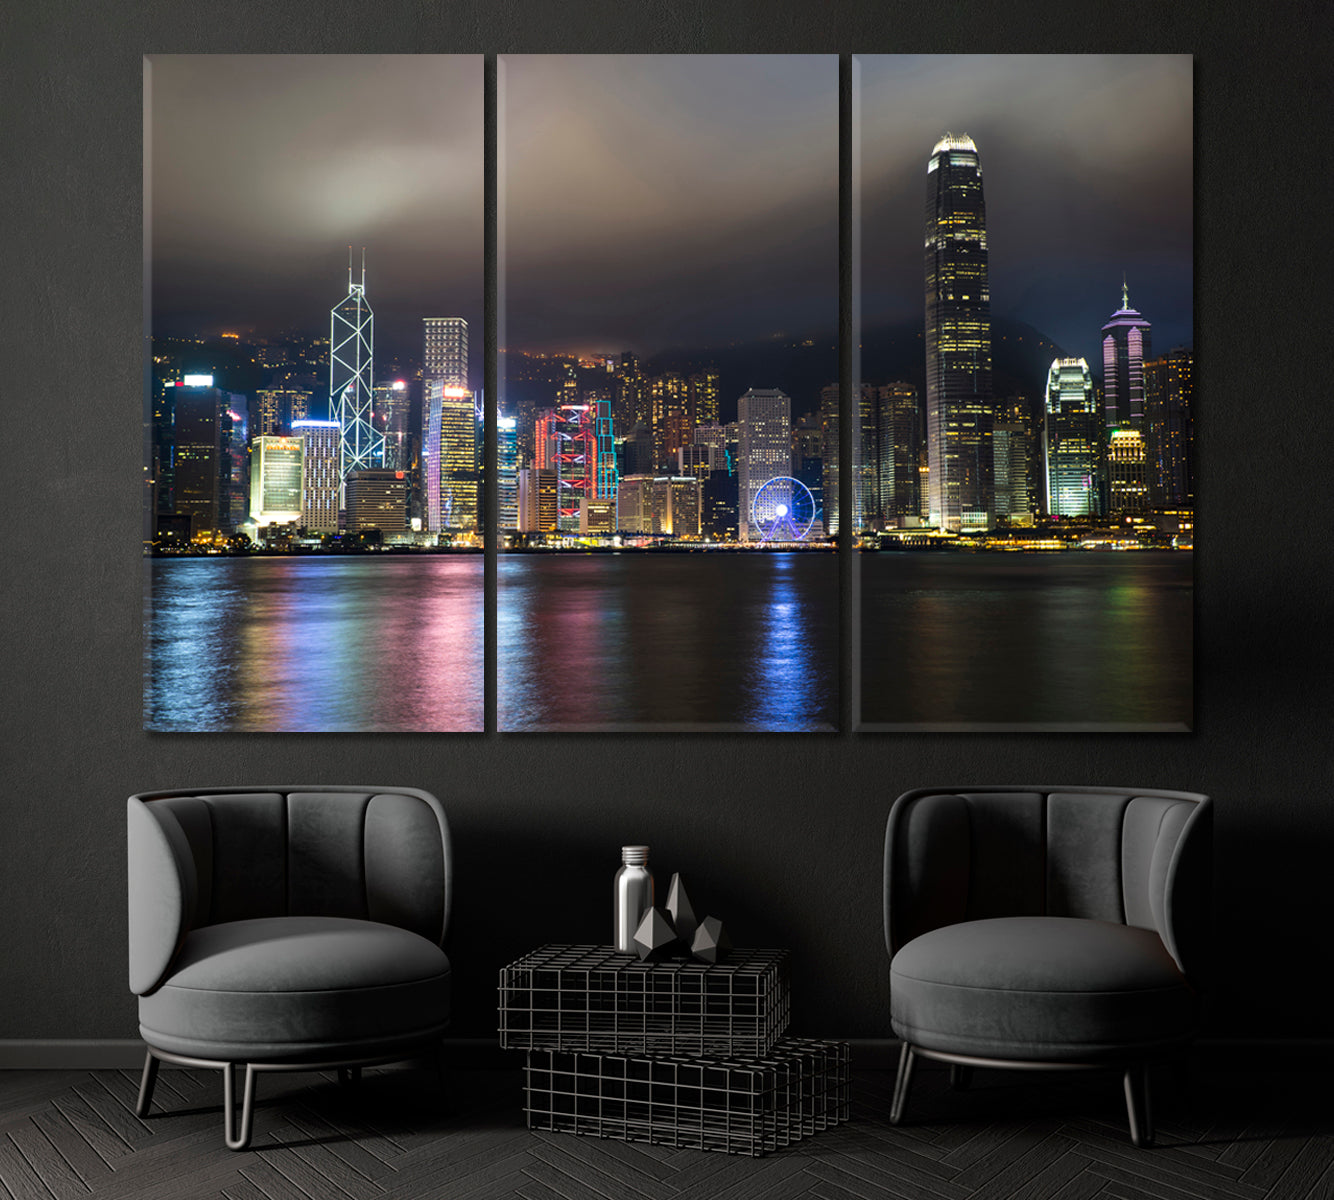 Hong Kong Victoria Harbour at Night Canvas Print ArtLexy 3 Panels 36"x24" inches 